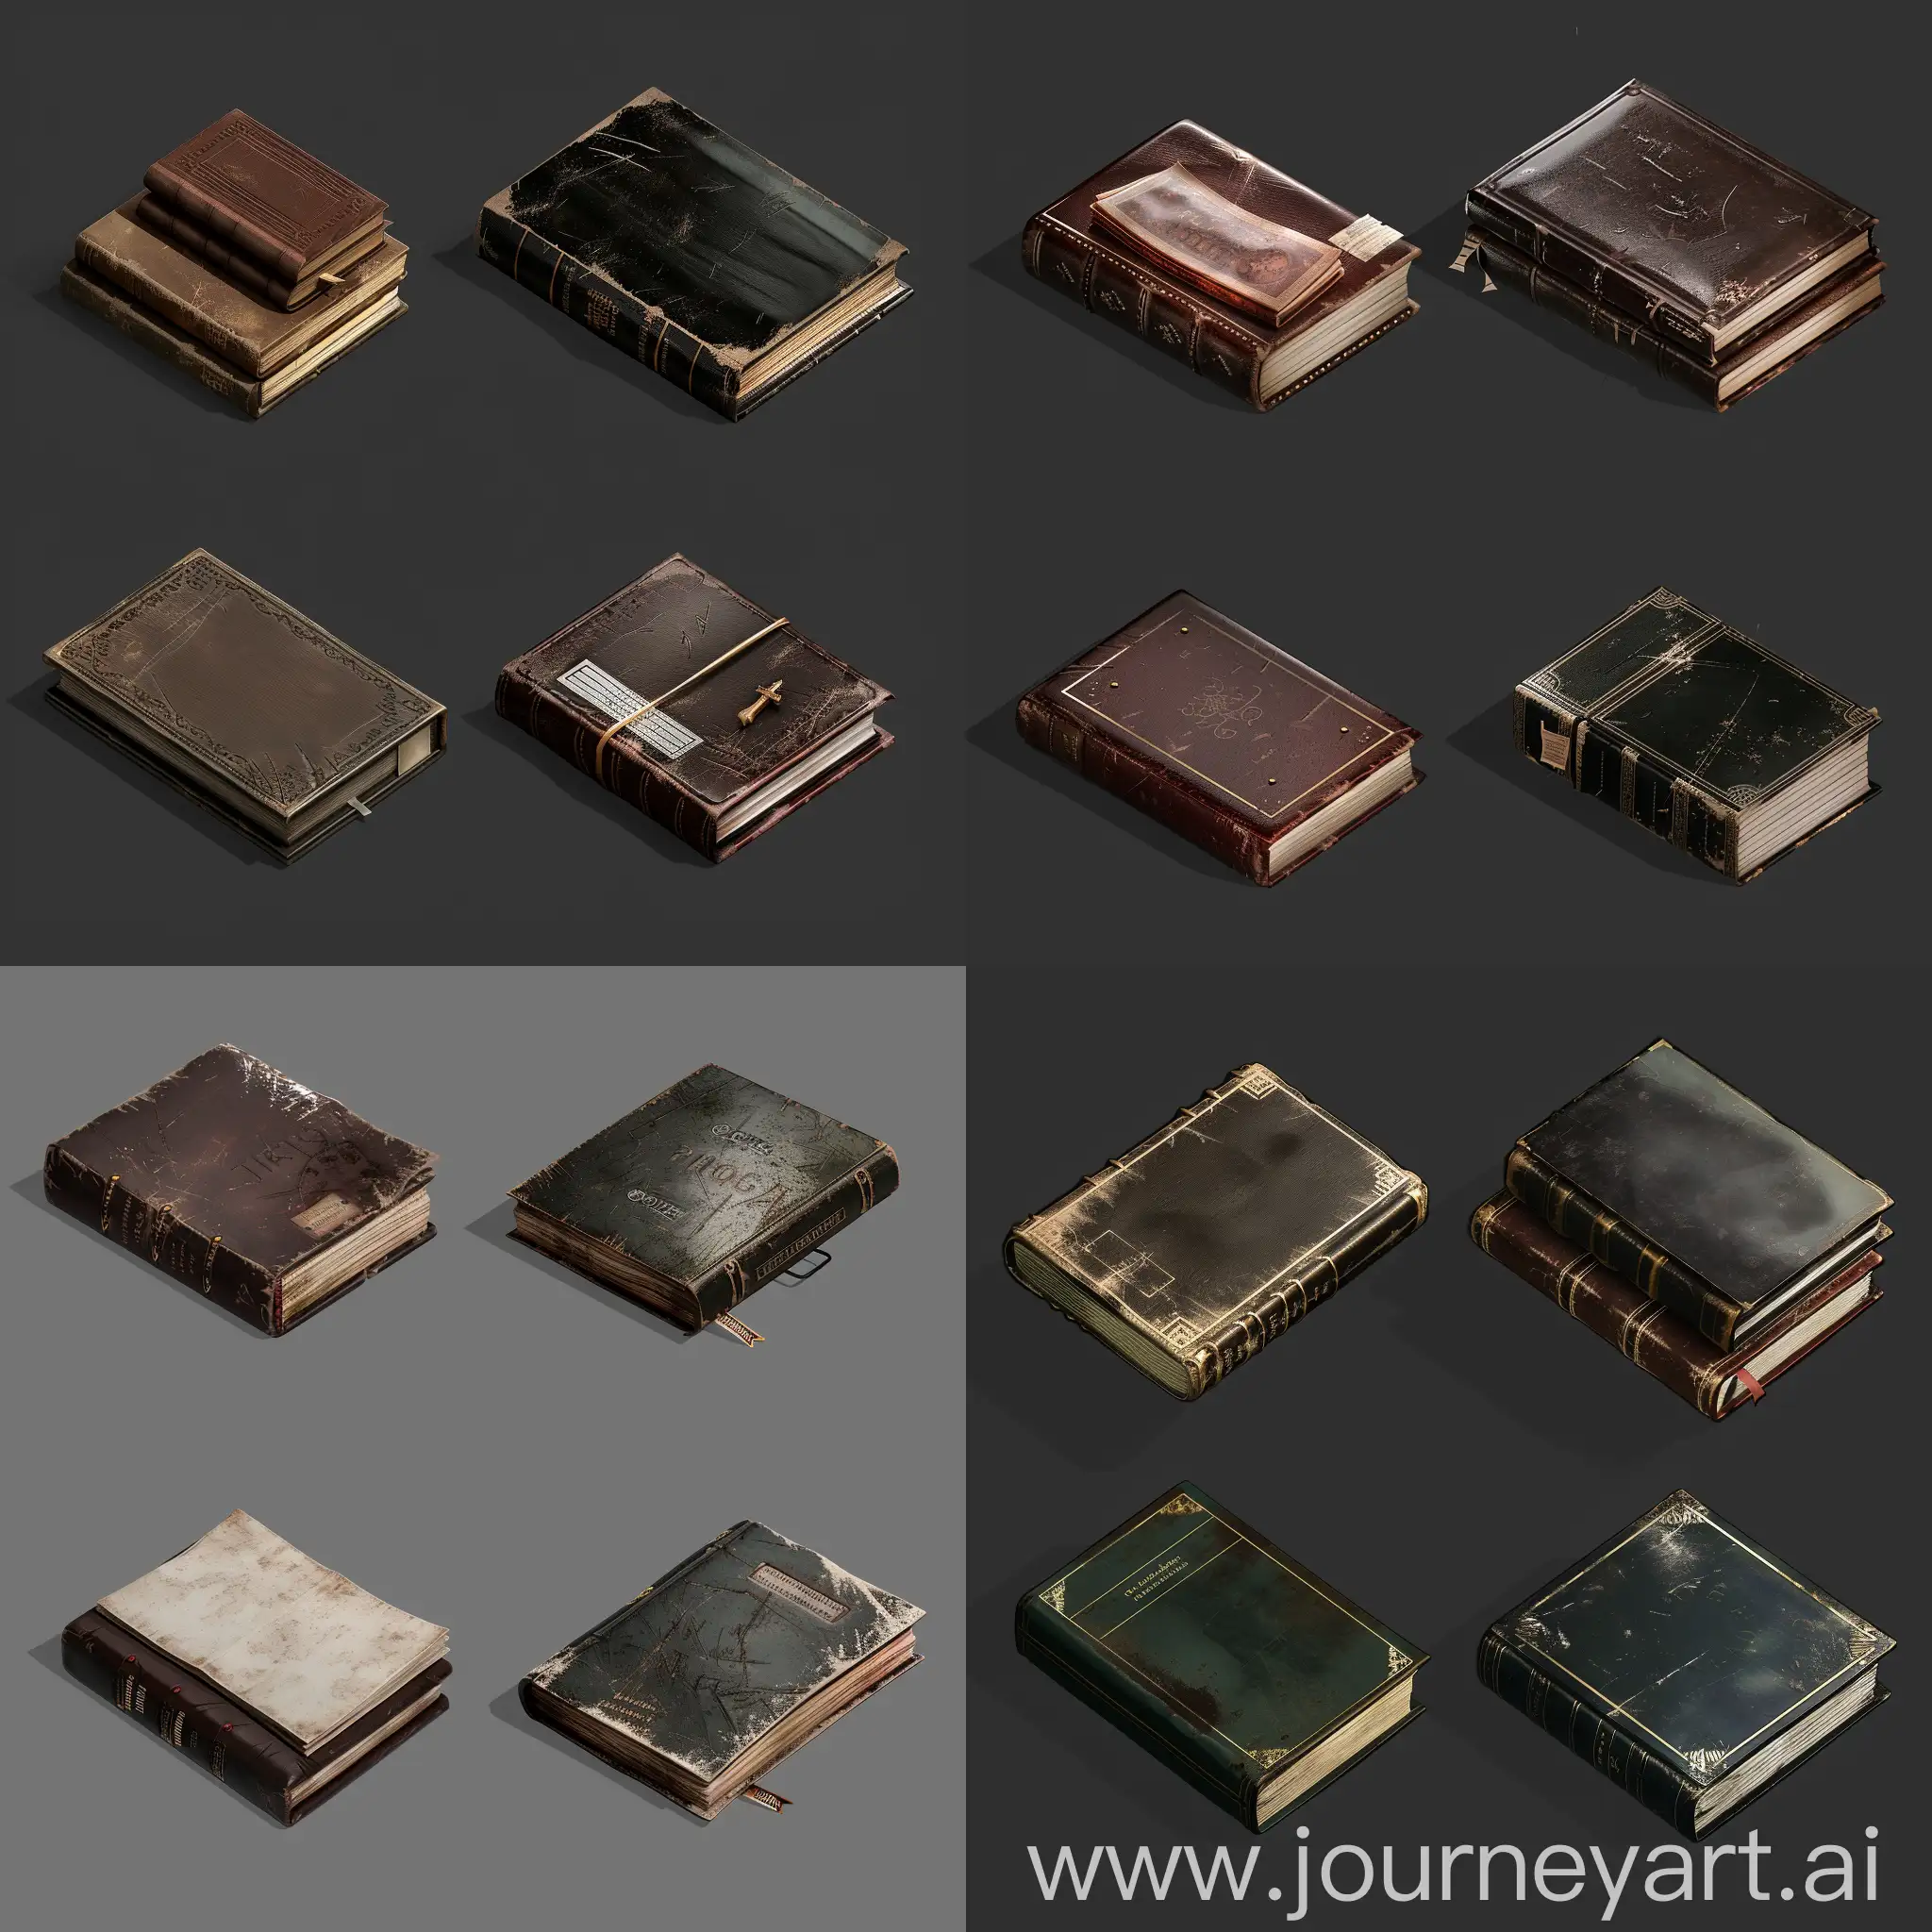 Isometric-Set-of-Worn-Books-Realistic-3D-Game-Asset-with-Shiny-Leather-Covers